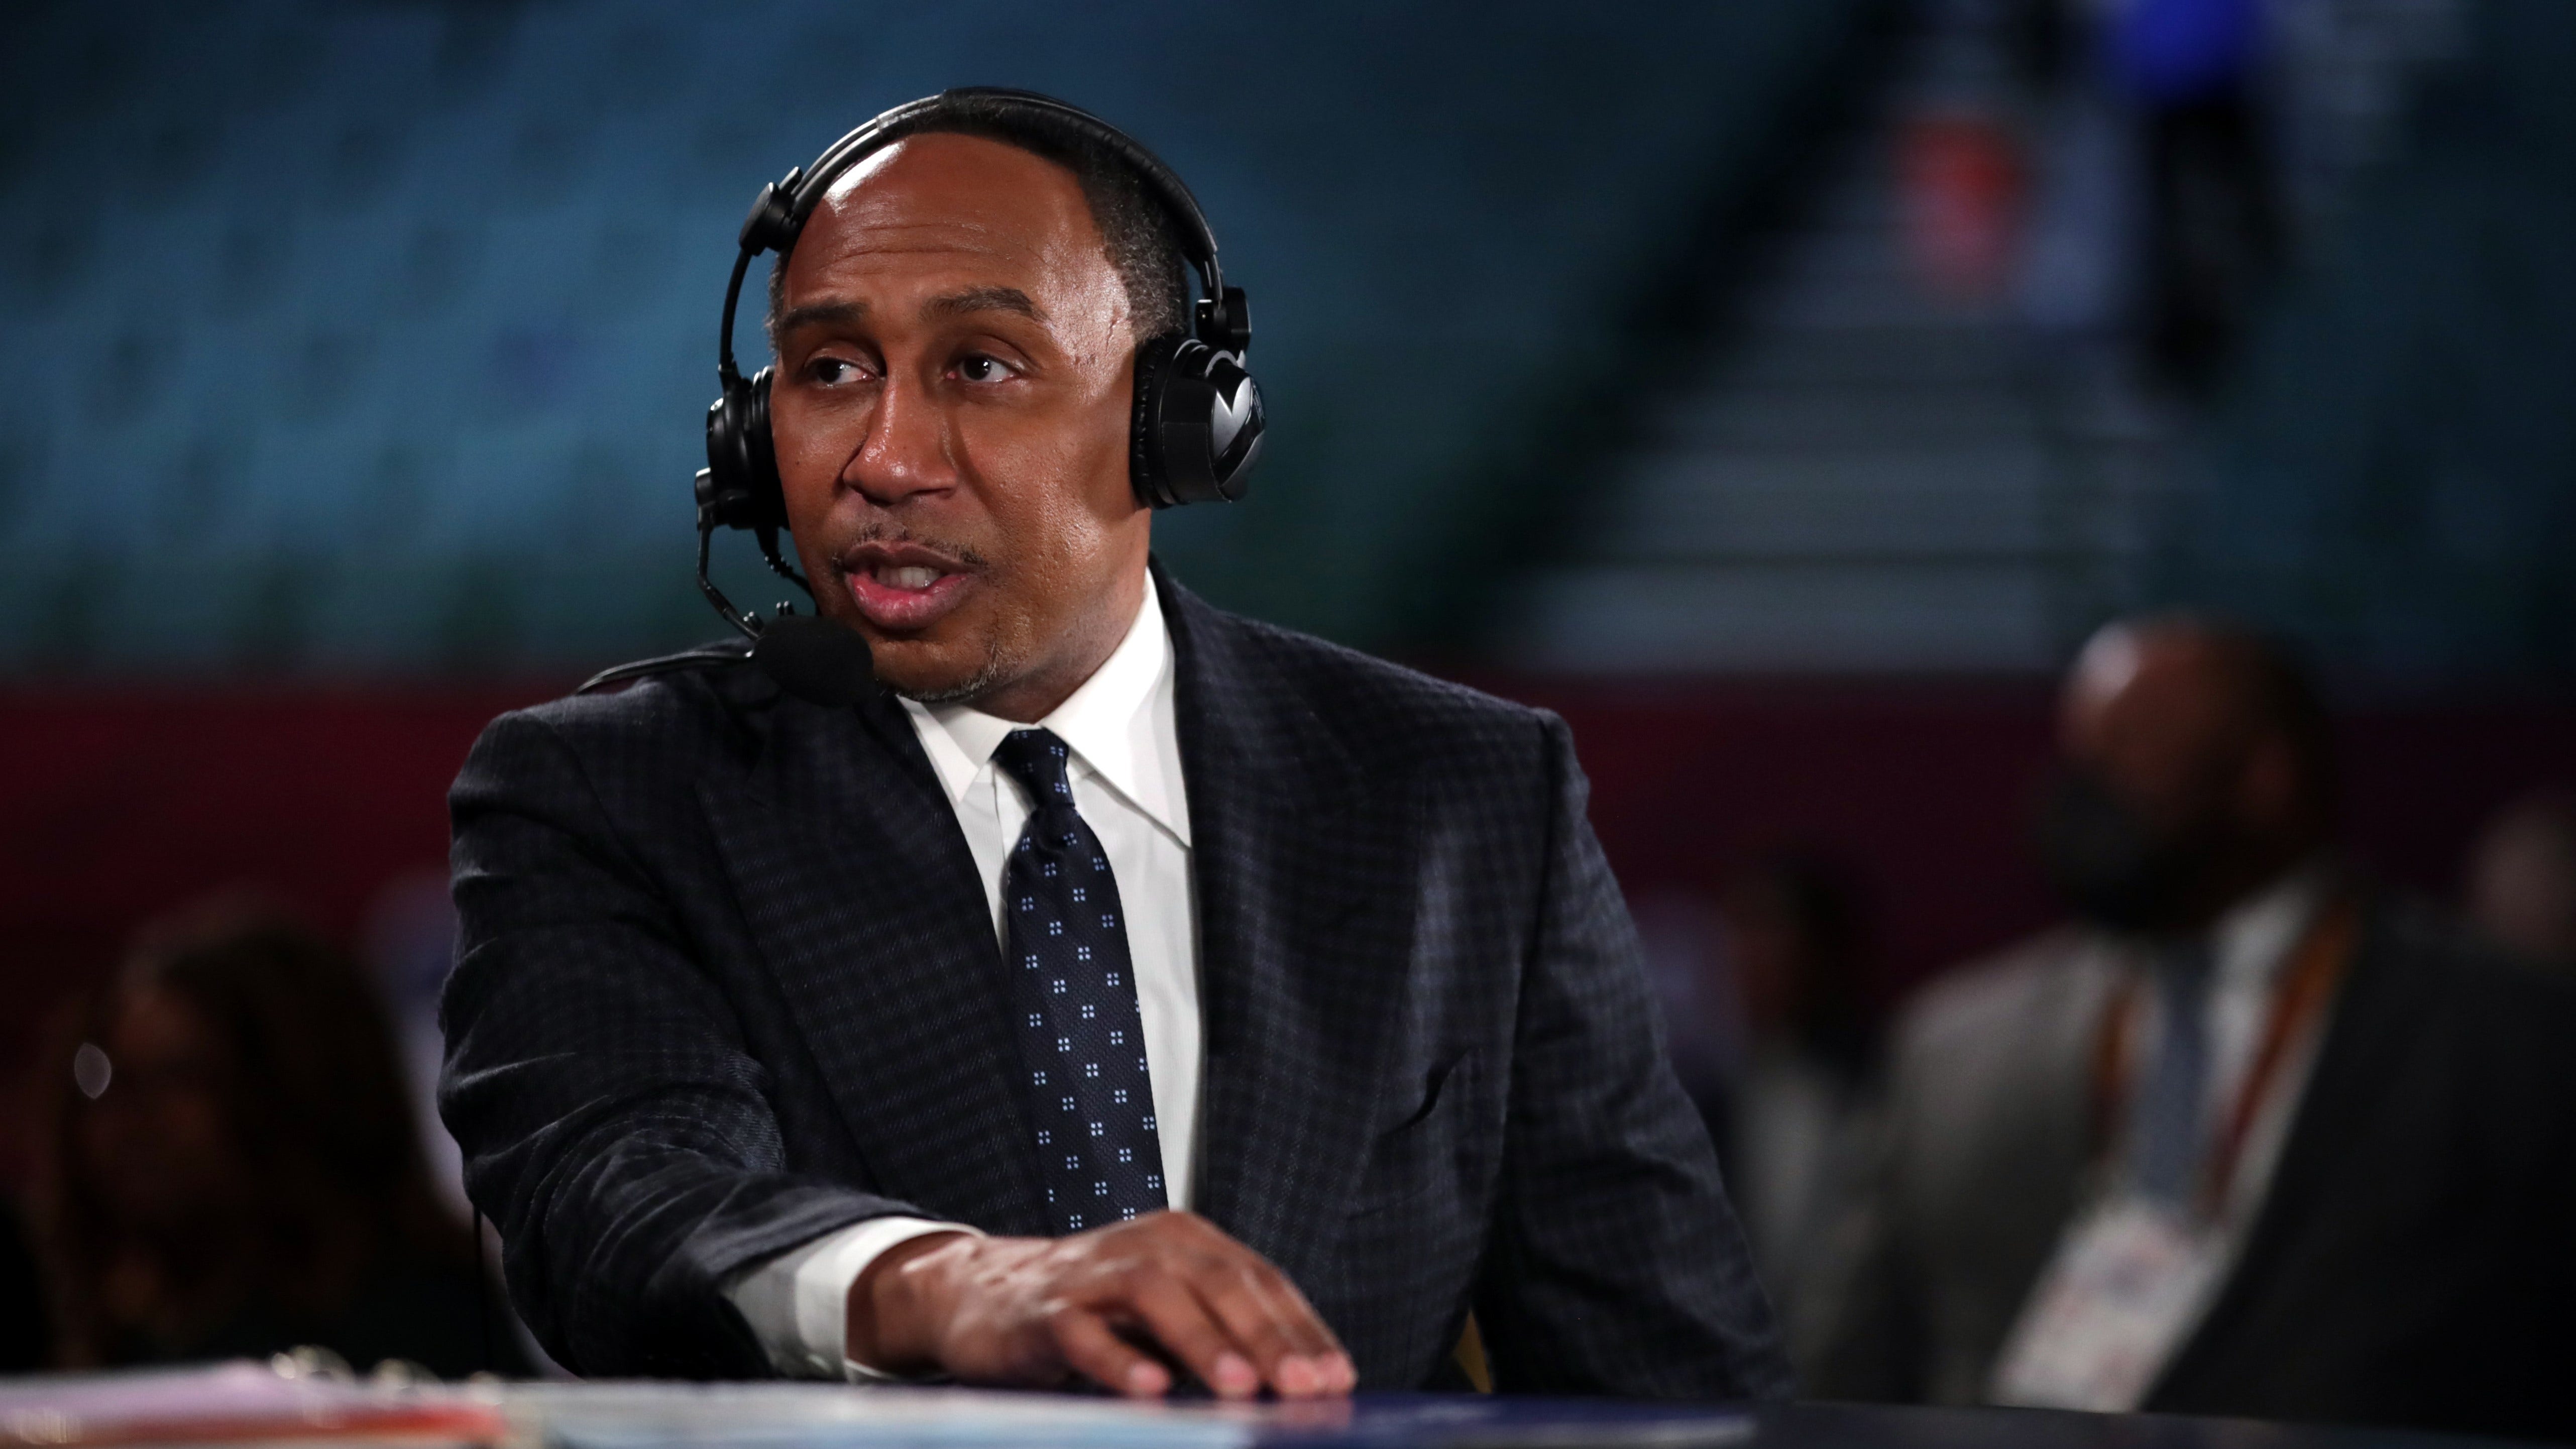 ESPN host rips sports-politics ‘hypocrisy,’ but says athletes should understand issues